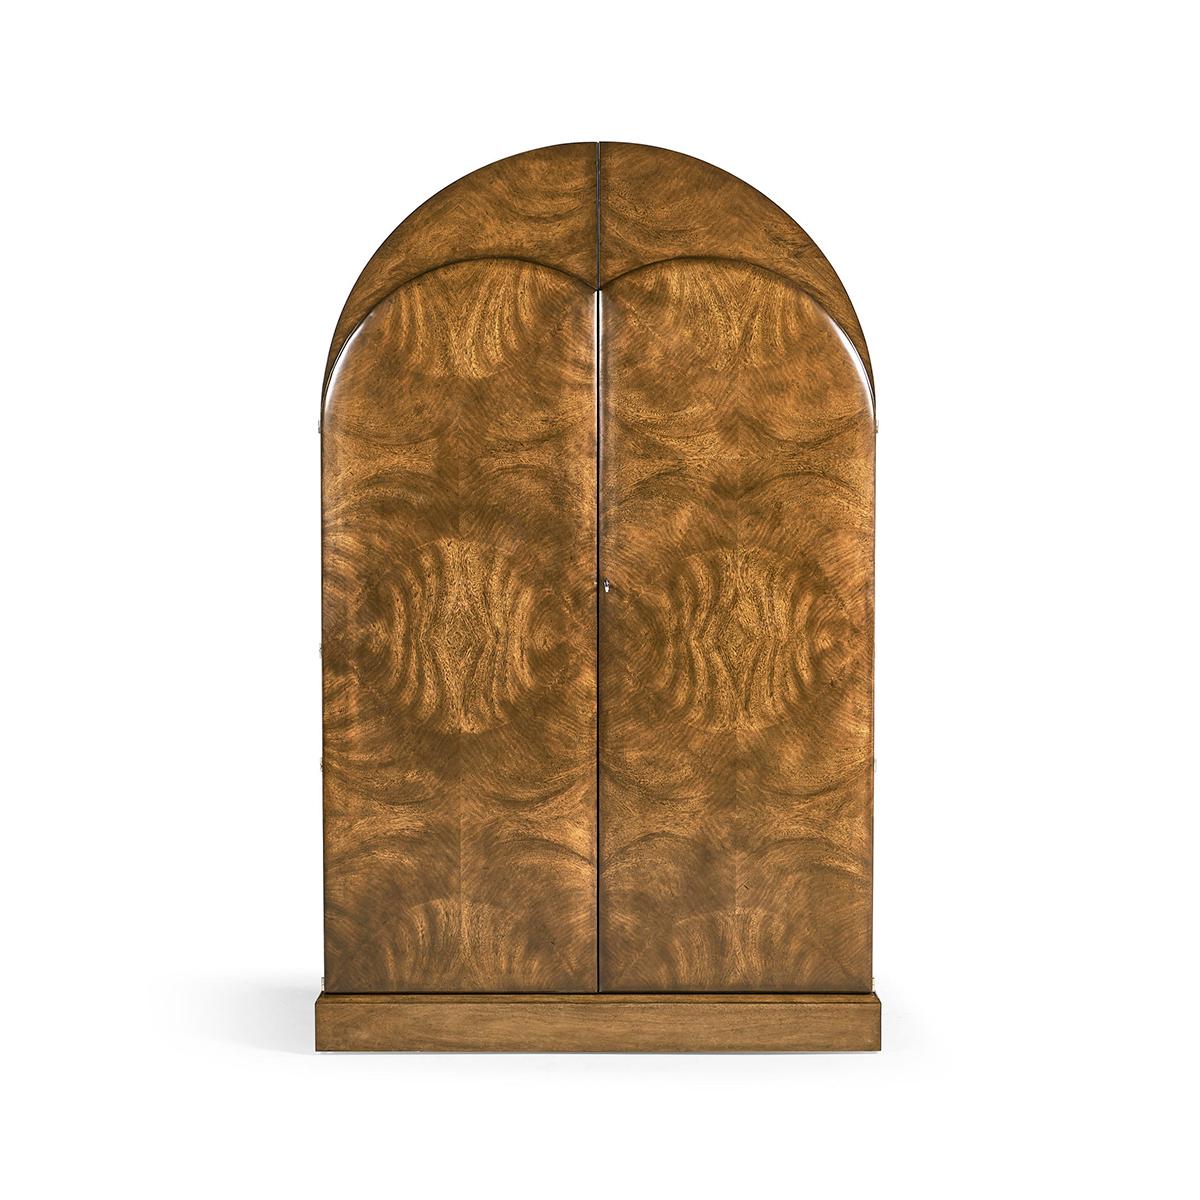 Made from crotch cerejeira and flat-cut mahogany veneers, this limited edition cabinet is all about lasting beauty. The natural cerejeira finish makes the wood look even more beautiful, turning the cabinet into something timeless and organic.

Open